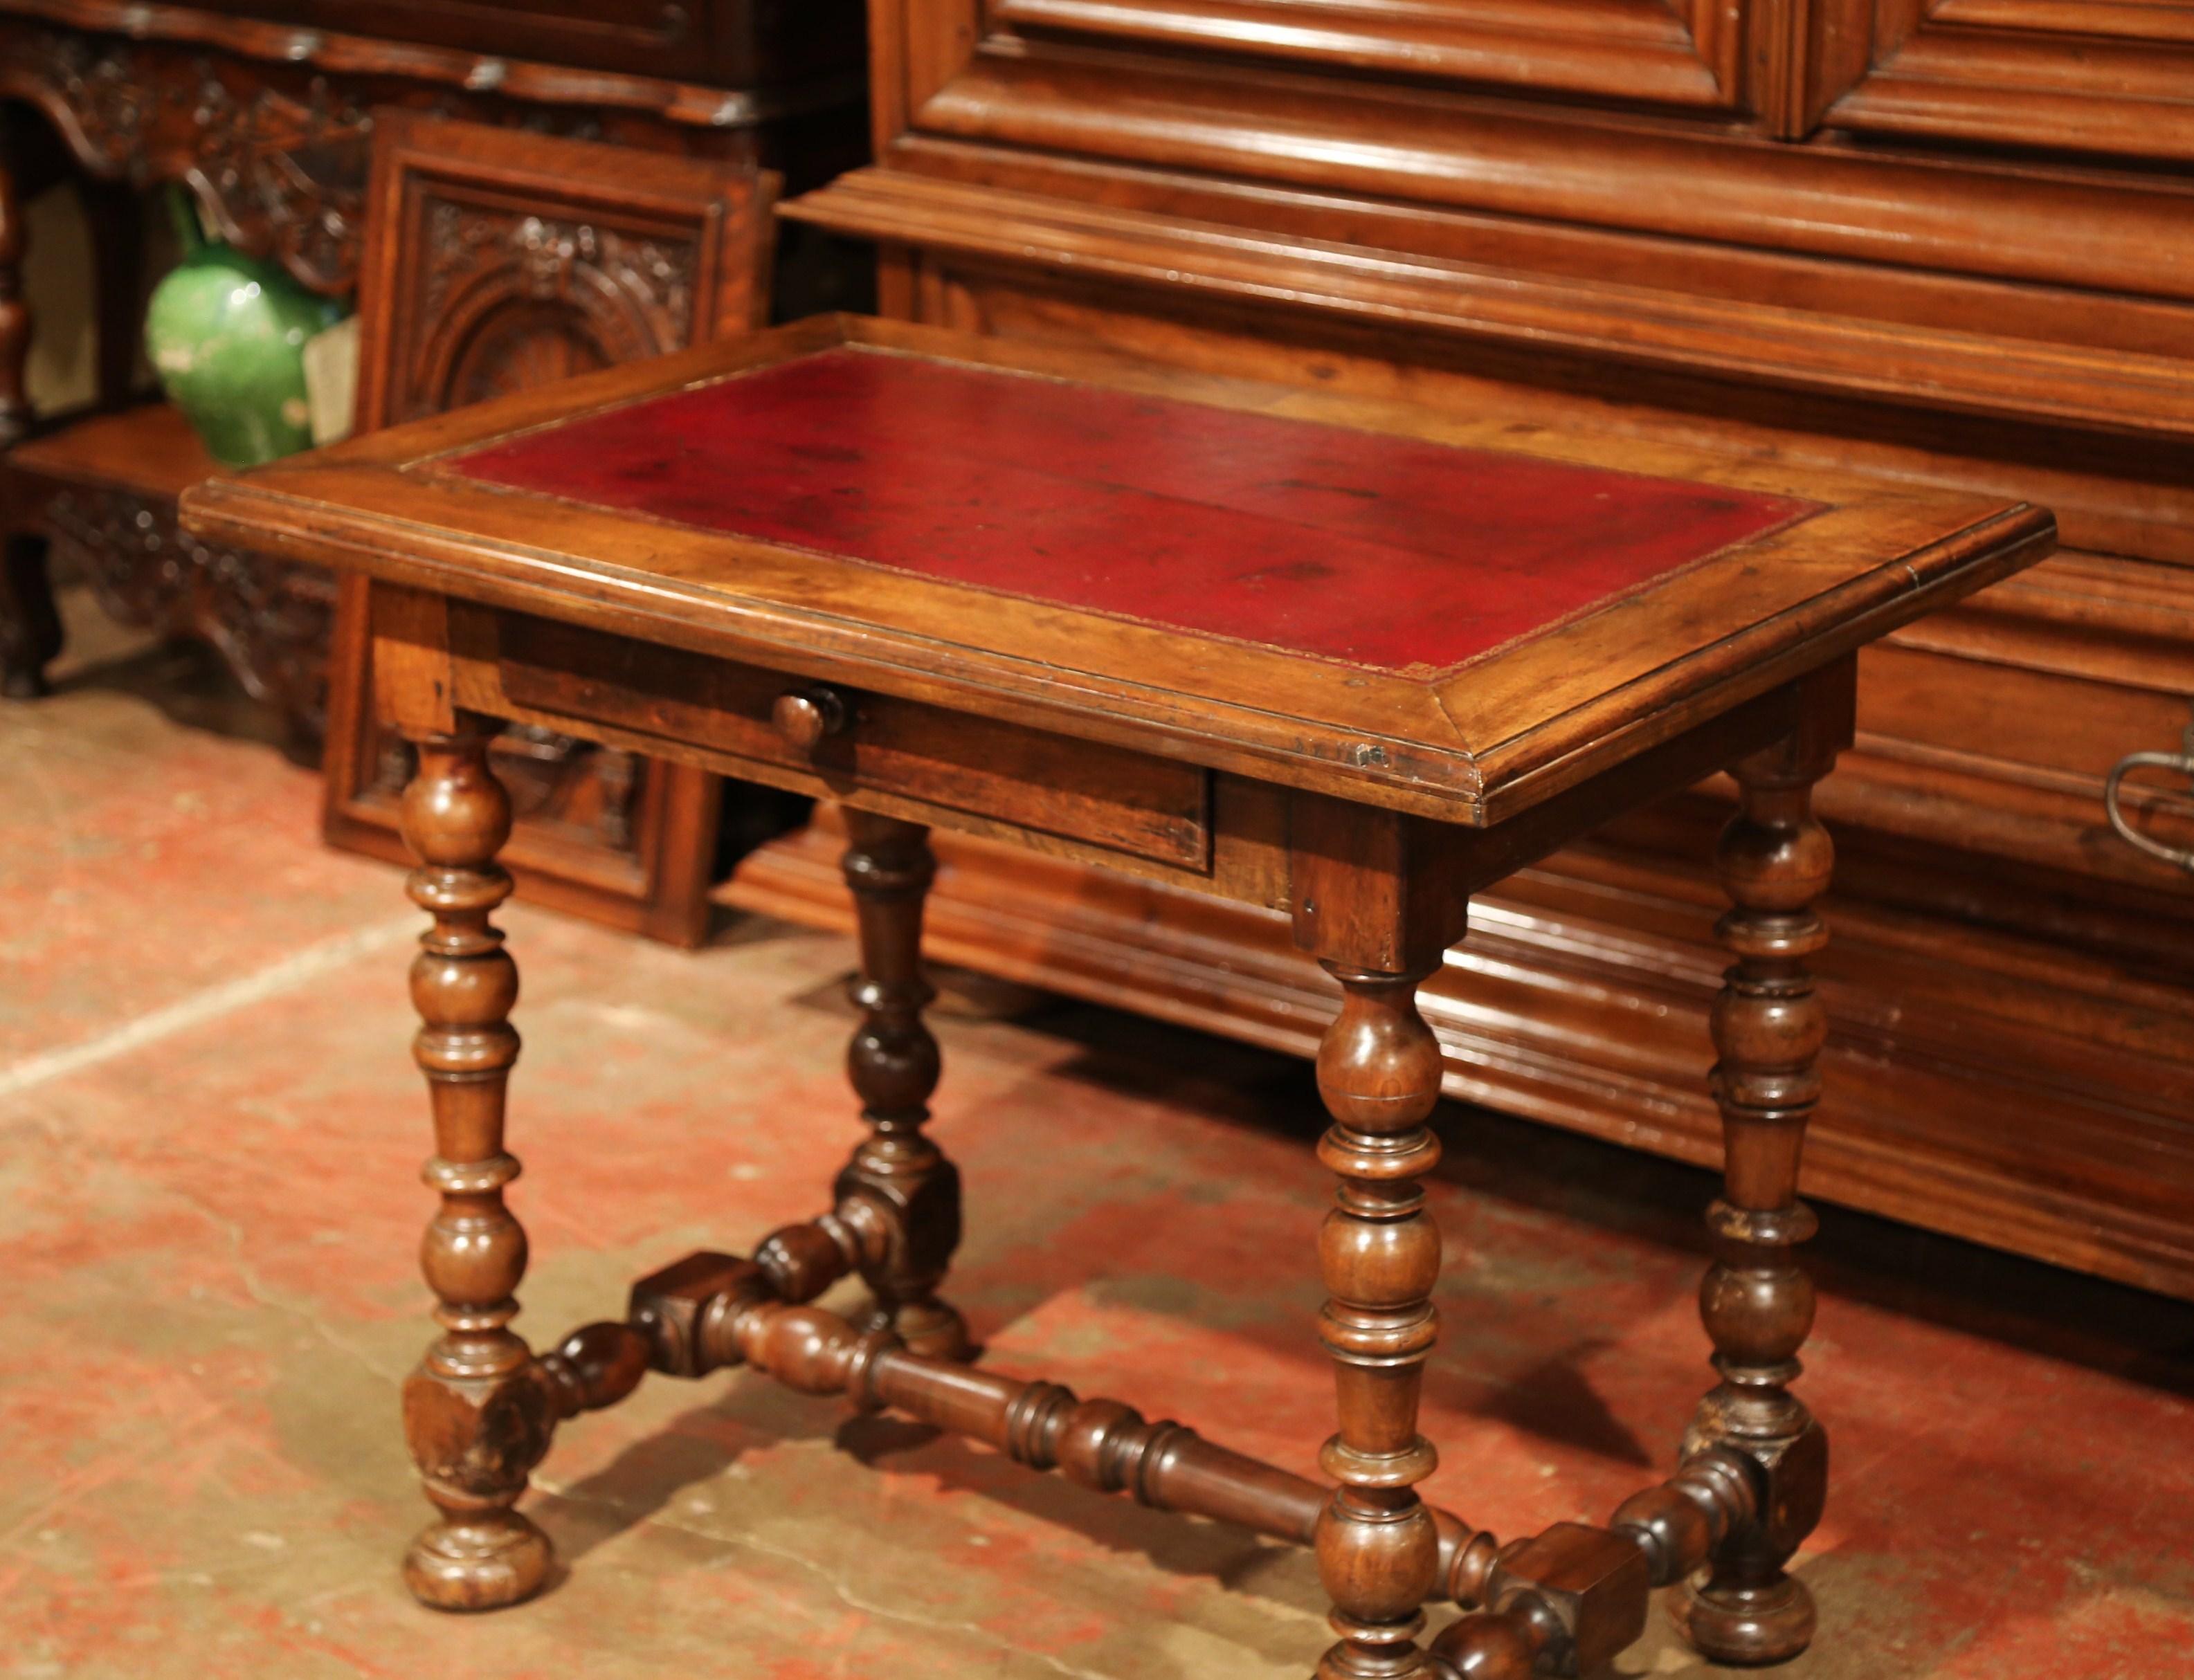 Incorporate extra, functional surface space into your living room with this elegant fruitwood end table. Crafted in the Perigord region of France, circa 1860, the side table features a single drawer across the front with original wooden knob. The